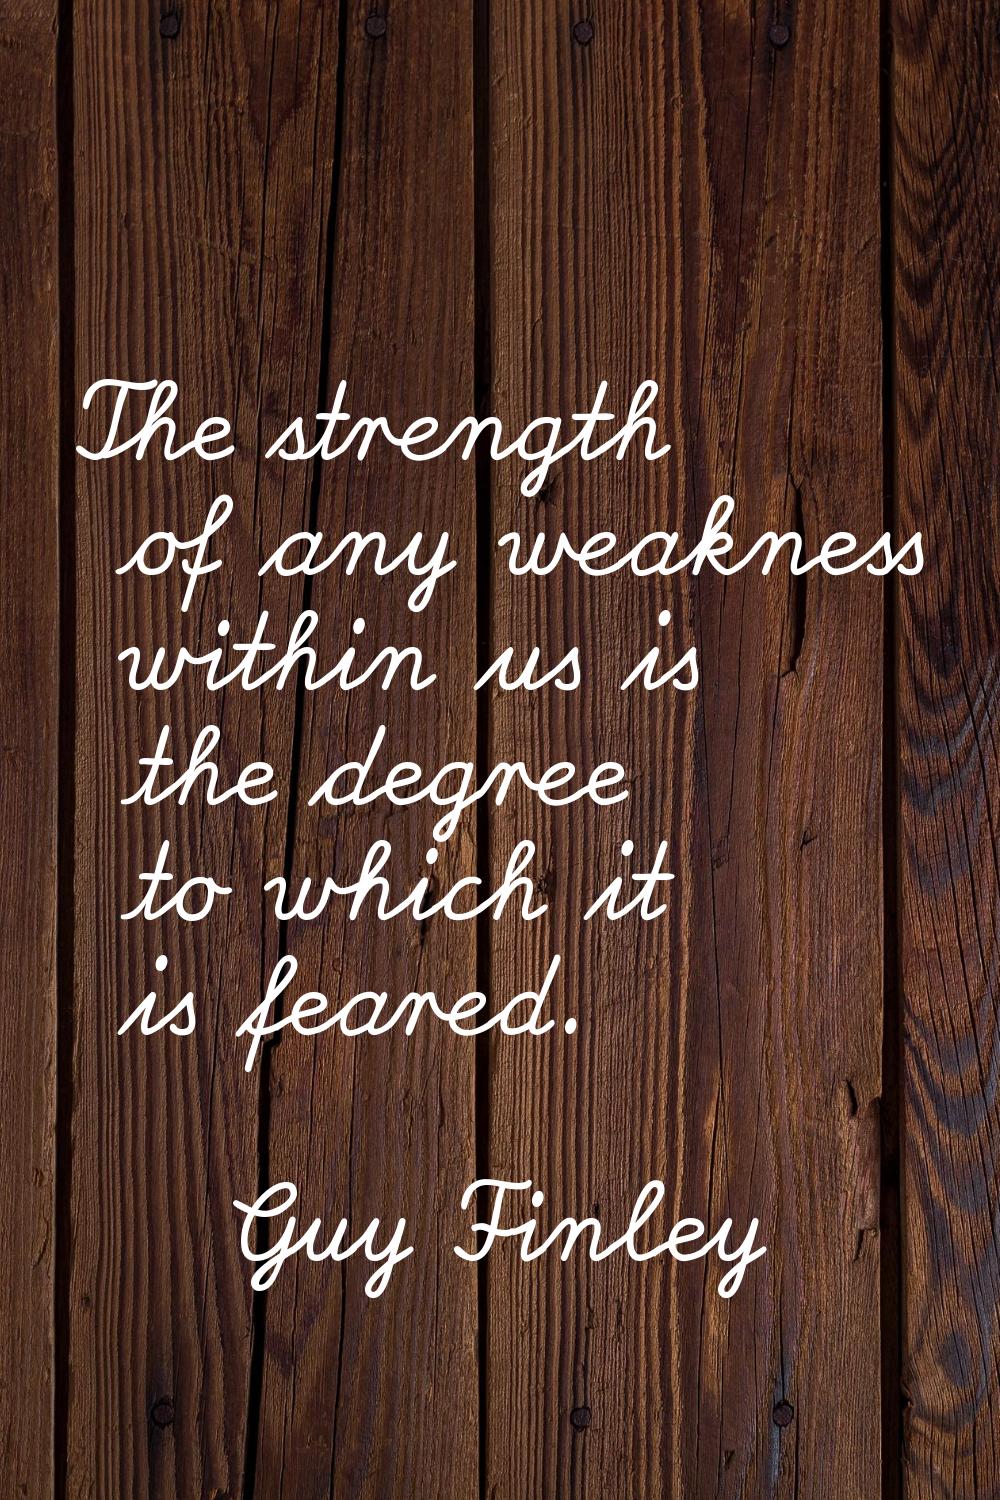 The strength of any weakness within us is the degree to which it is feared.